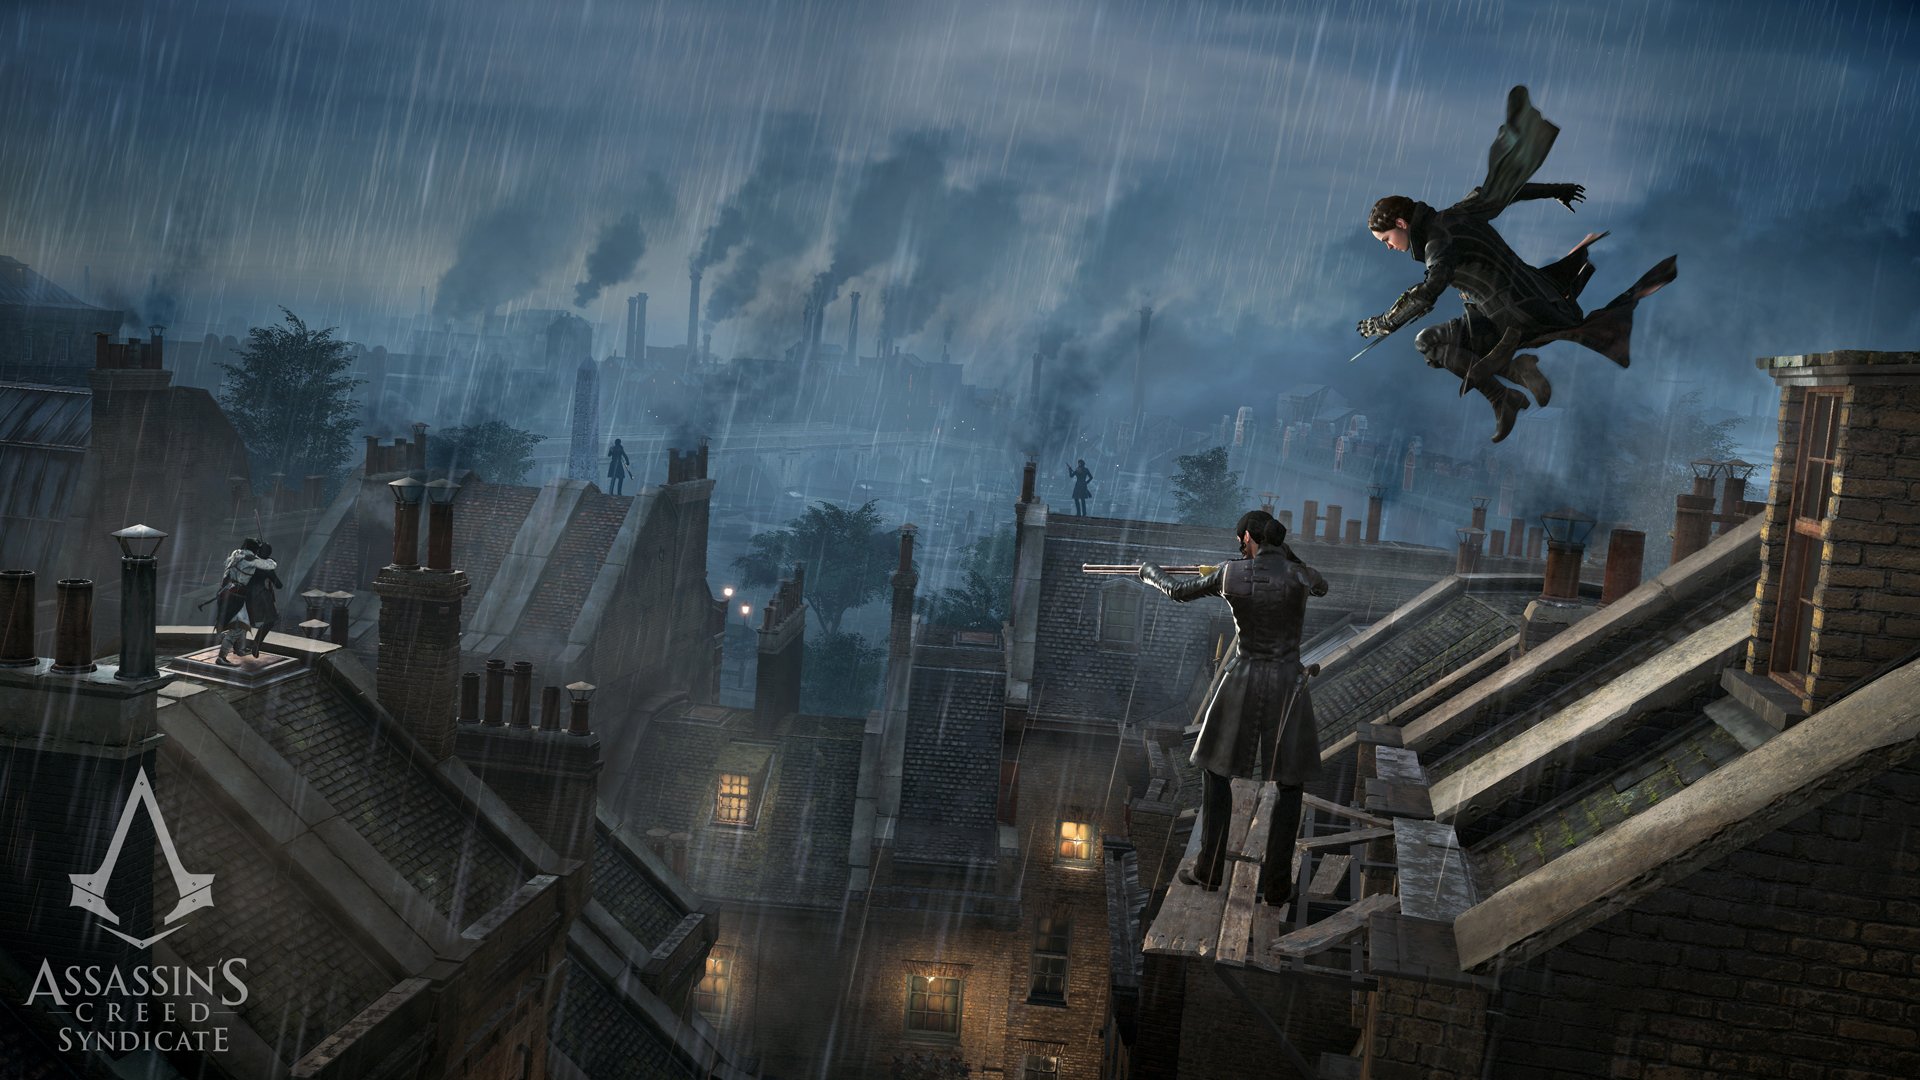 assassin's creed syndicate wallpaper,action adventure game,pc game,games,strategy video game,shooter game